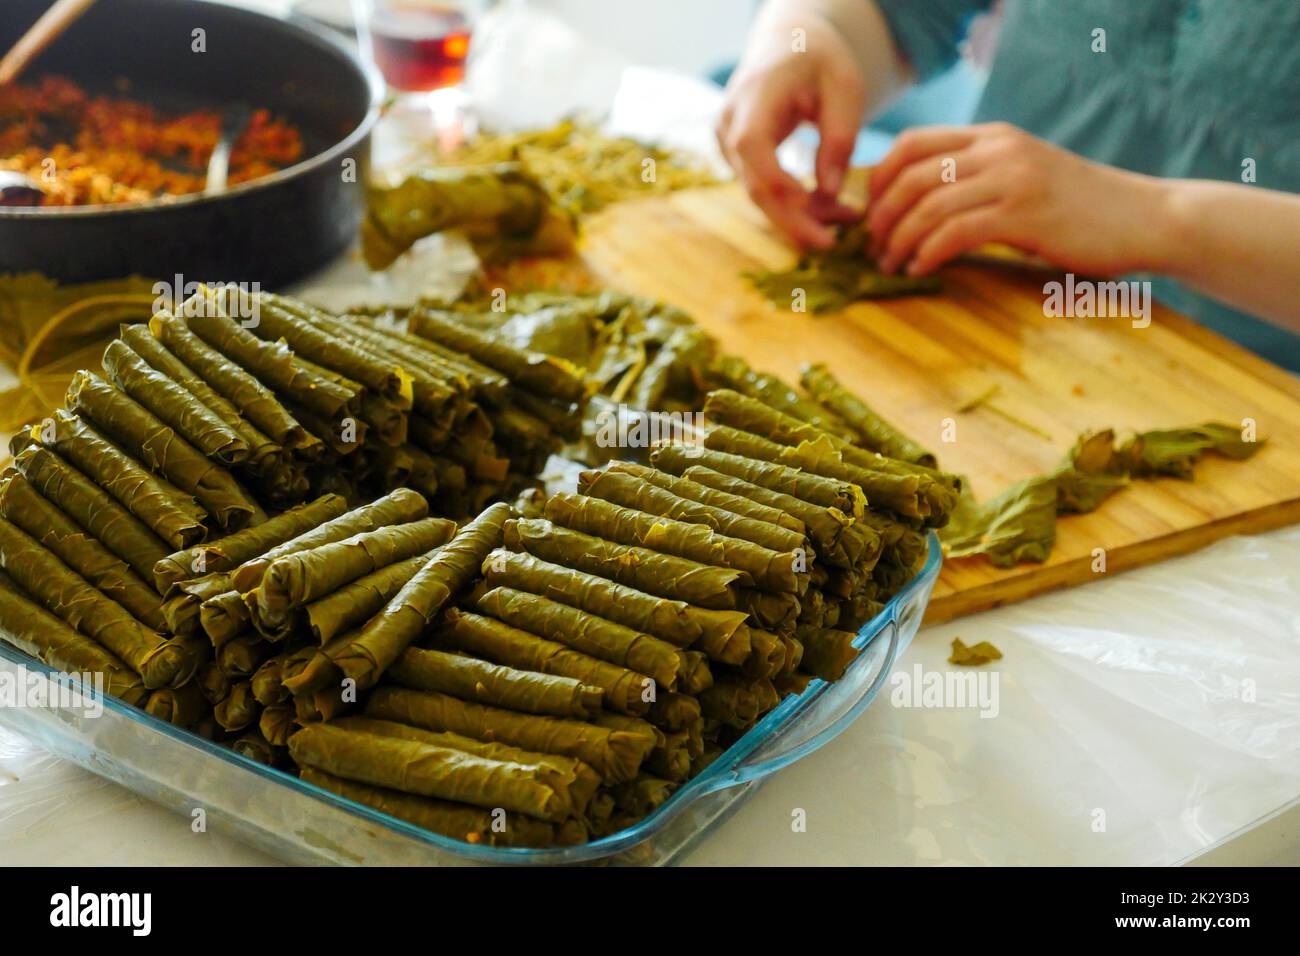 a cook making stuffed leaves, making stuffed leaves at home, stuffed leaves from Turkish cuisine Stock Photo